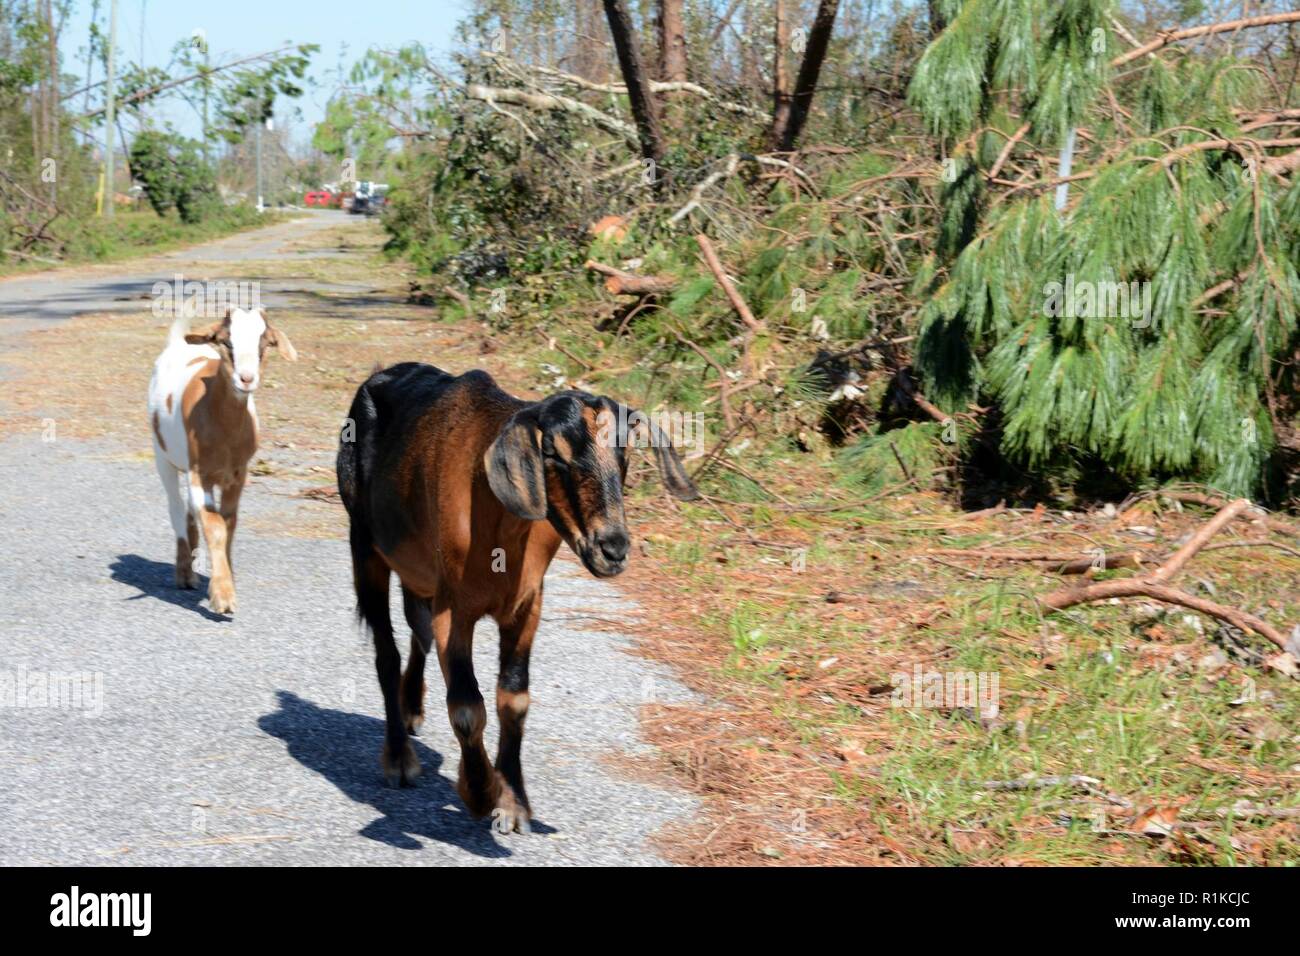 A couple goats roam loose down Debi Road in the Bayou George area of Panama City, Fla., Oct. 14, 2018, while the 202nd REDHORSE works diligently to clear the road. The REDHORSE was called on for their expertise in efficient route clearing after Hurricane Michael came through. Stock Photo